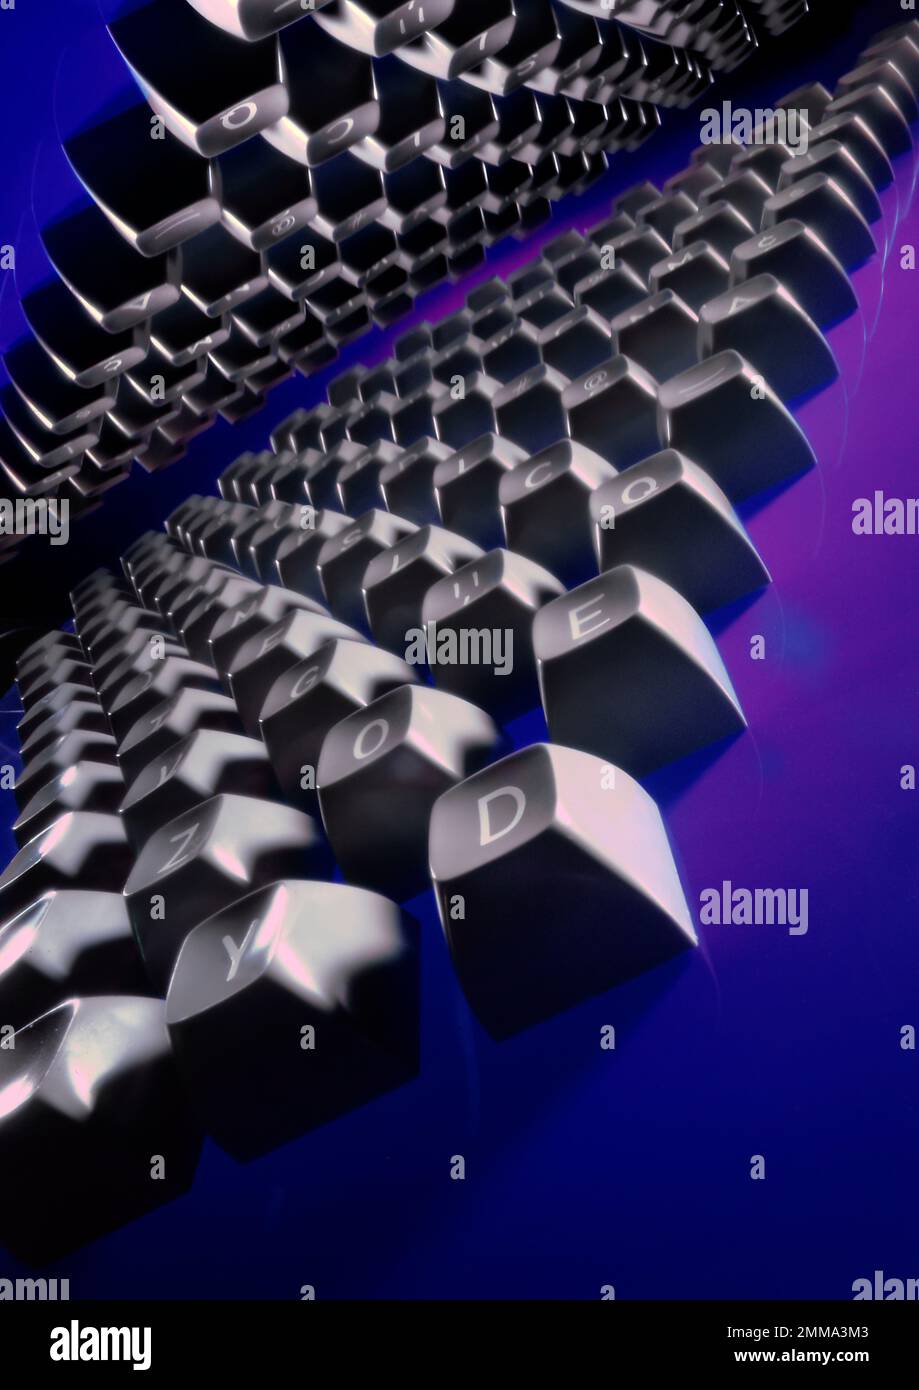 Computer keys in graphic, dramatic image, with vanishing point to the horizon.  Purple background in this studio photograph. Stock Photo